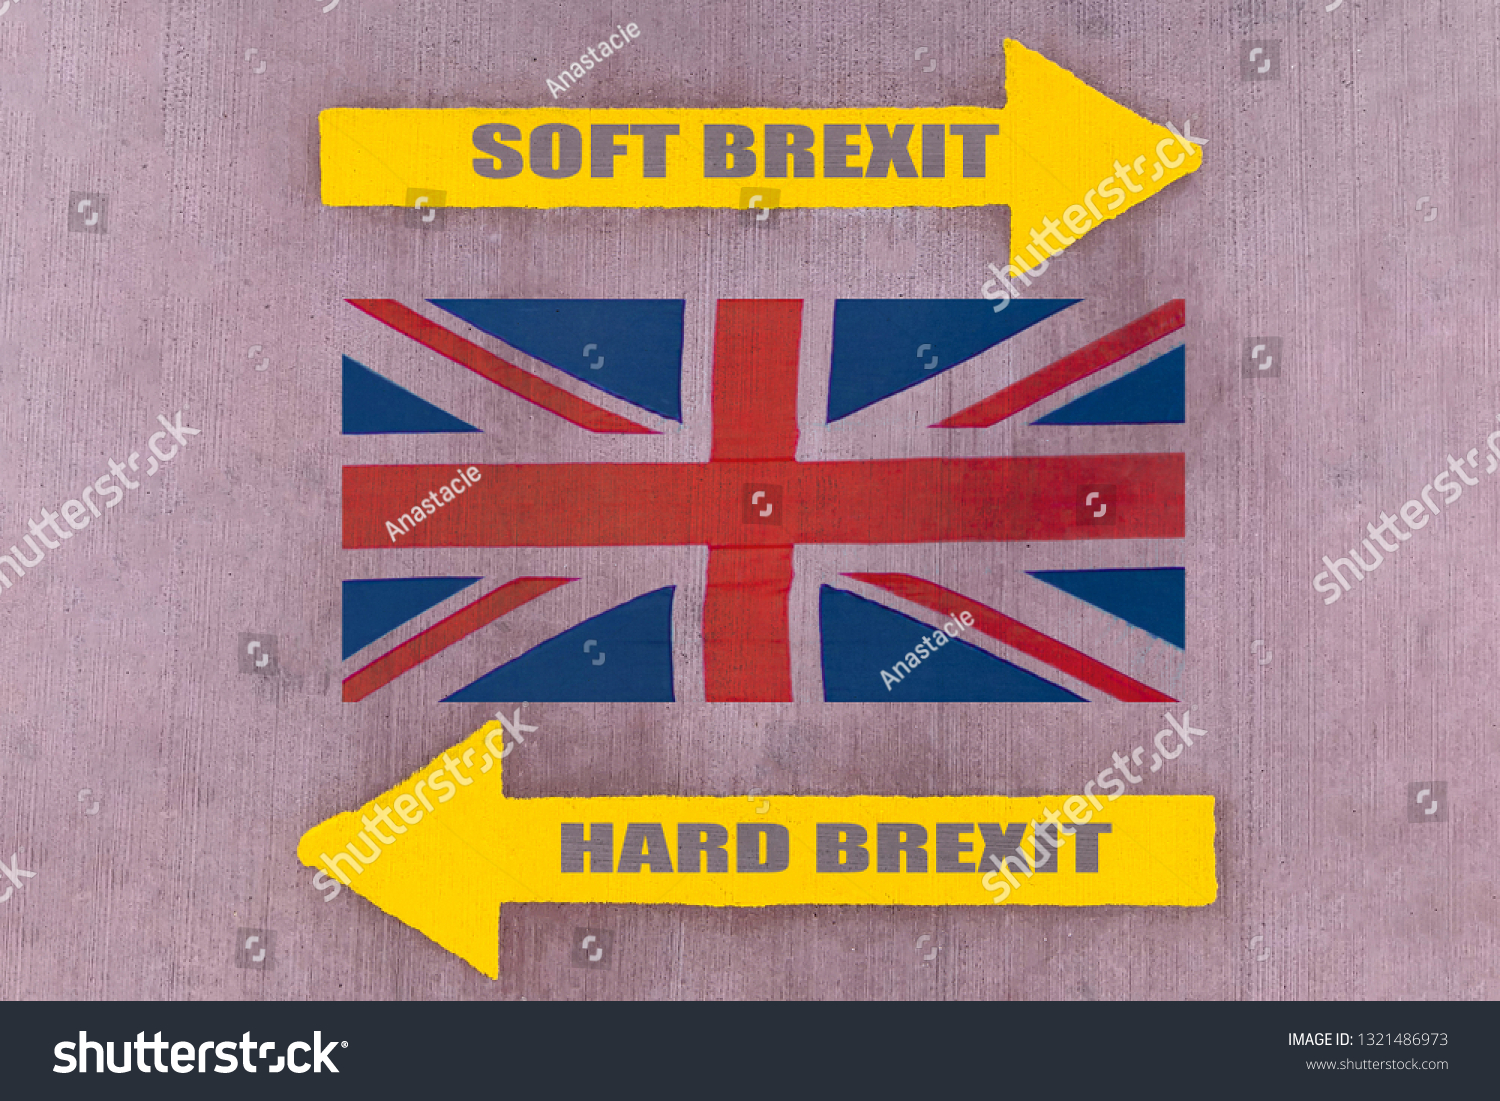 Two yellow arrow pointers showing the opposite direction, the inscriptions "SOFT BREXIT" and "HARD BREXIT" on a rubber pavement, Union Jack flag between them (concept) #1321486973